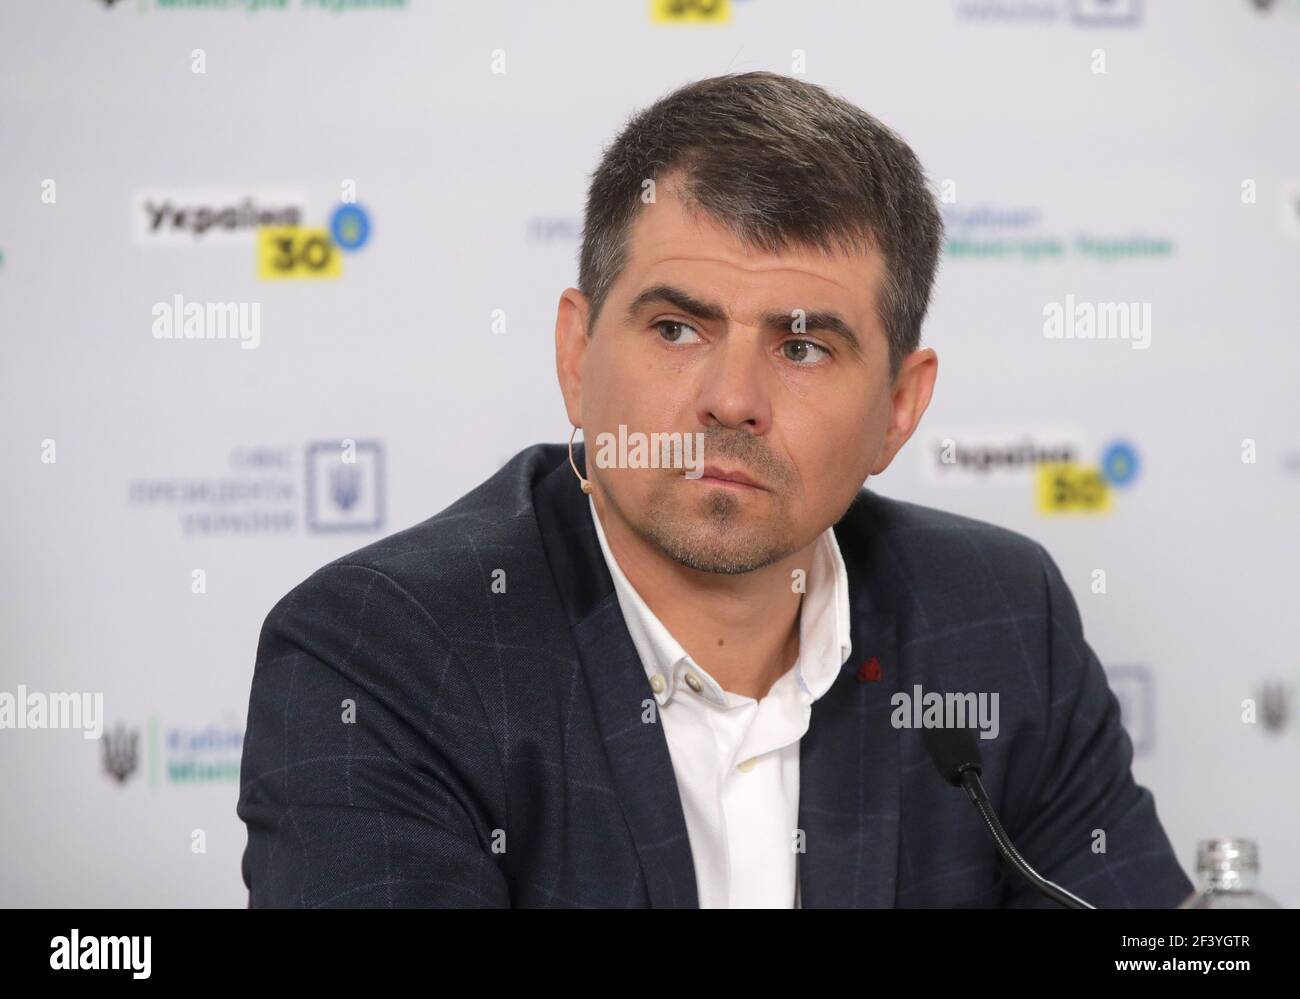 KYIV, UKRAINE - MARCH 18, 2021 - Head of the Association of Small and Medium Business Owners Ruslan Sobol attends a briefing held on the sidelines on Stock Photo